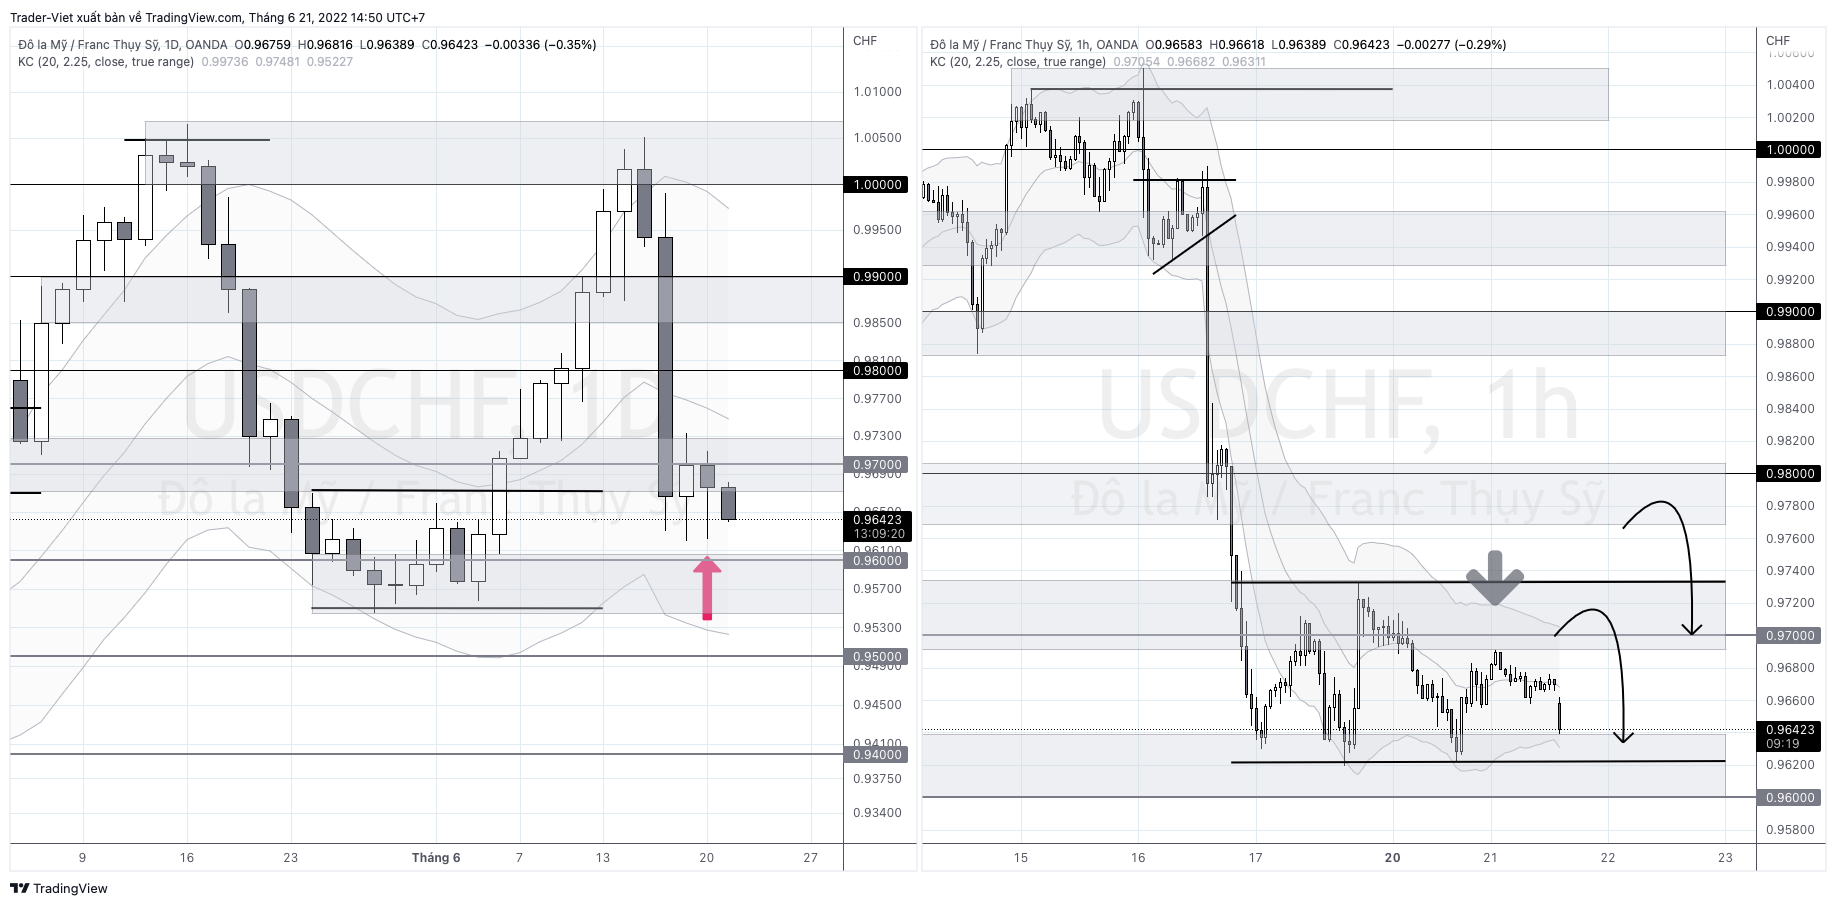 USDCHF_2022-06-21_14-50-41.png